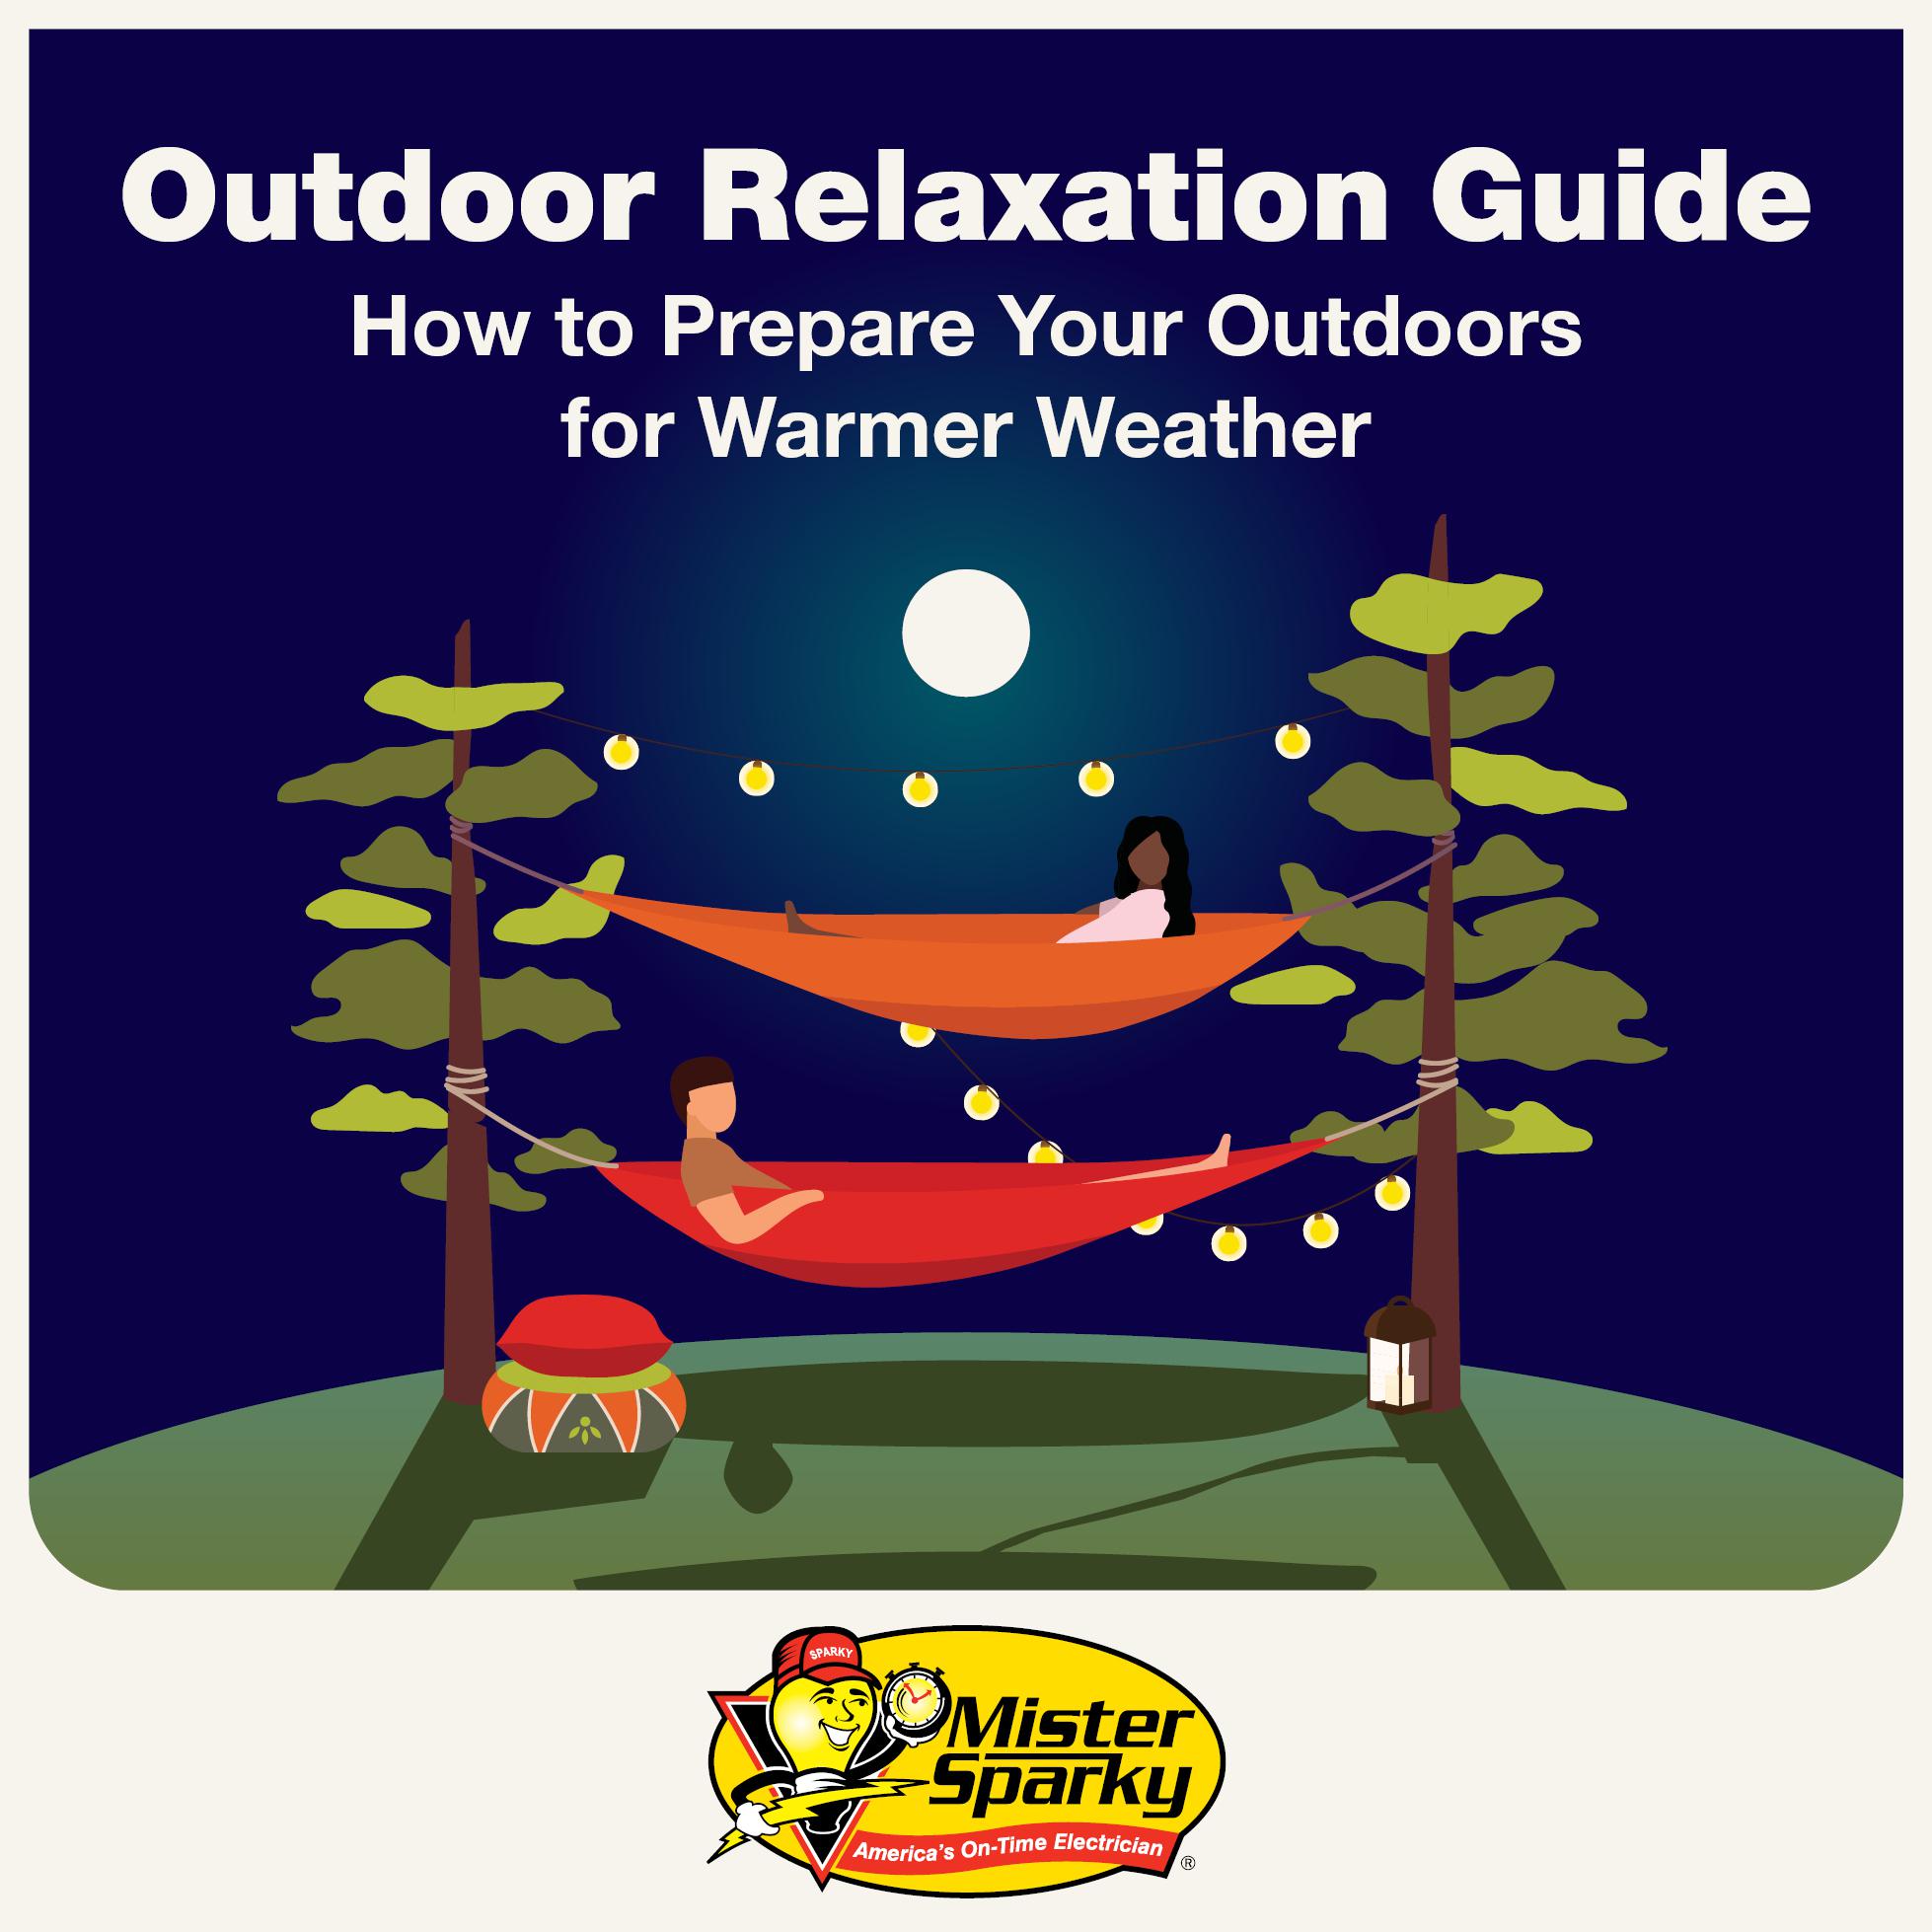 Mister Sparky's Outdoor Relaxation Guide